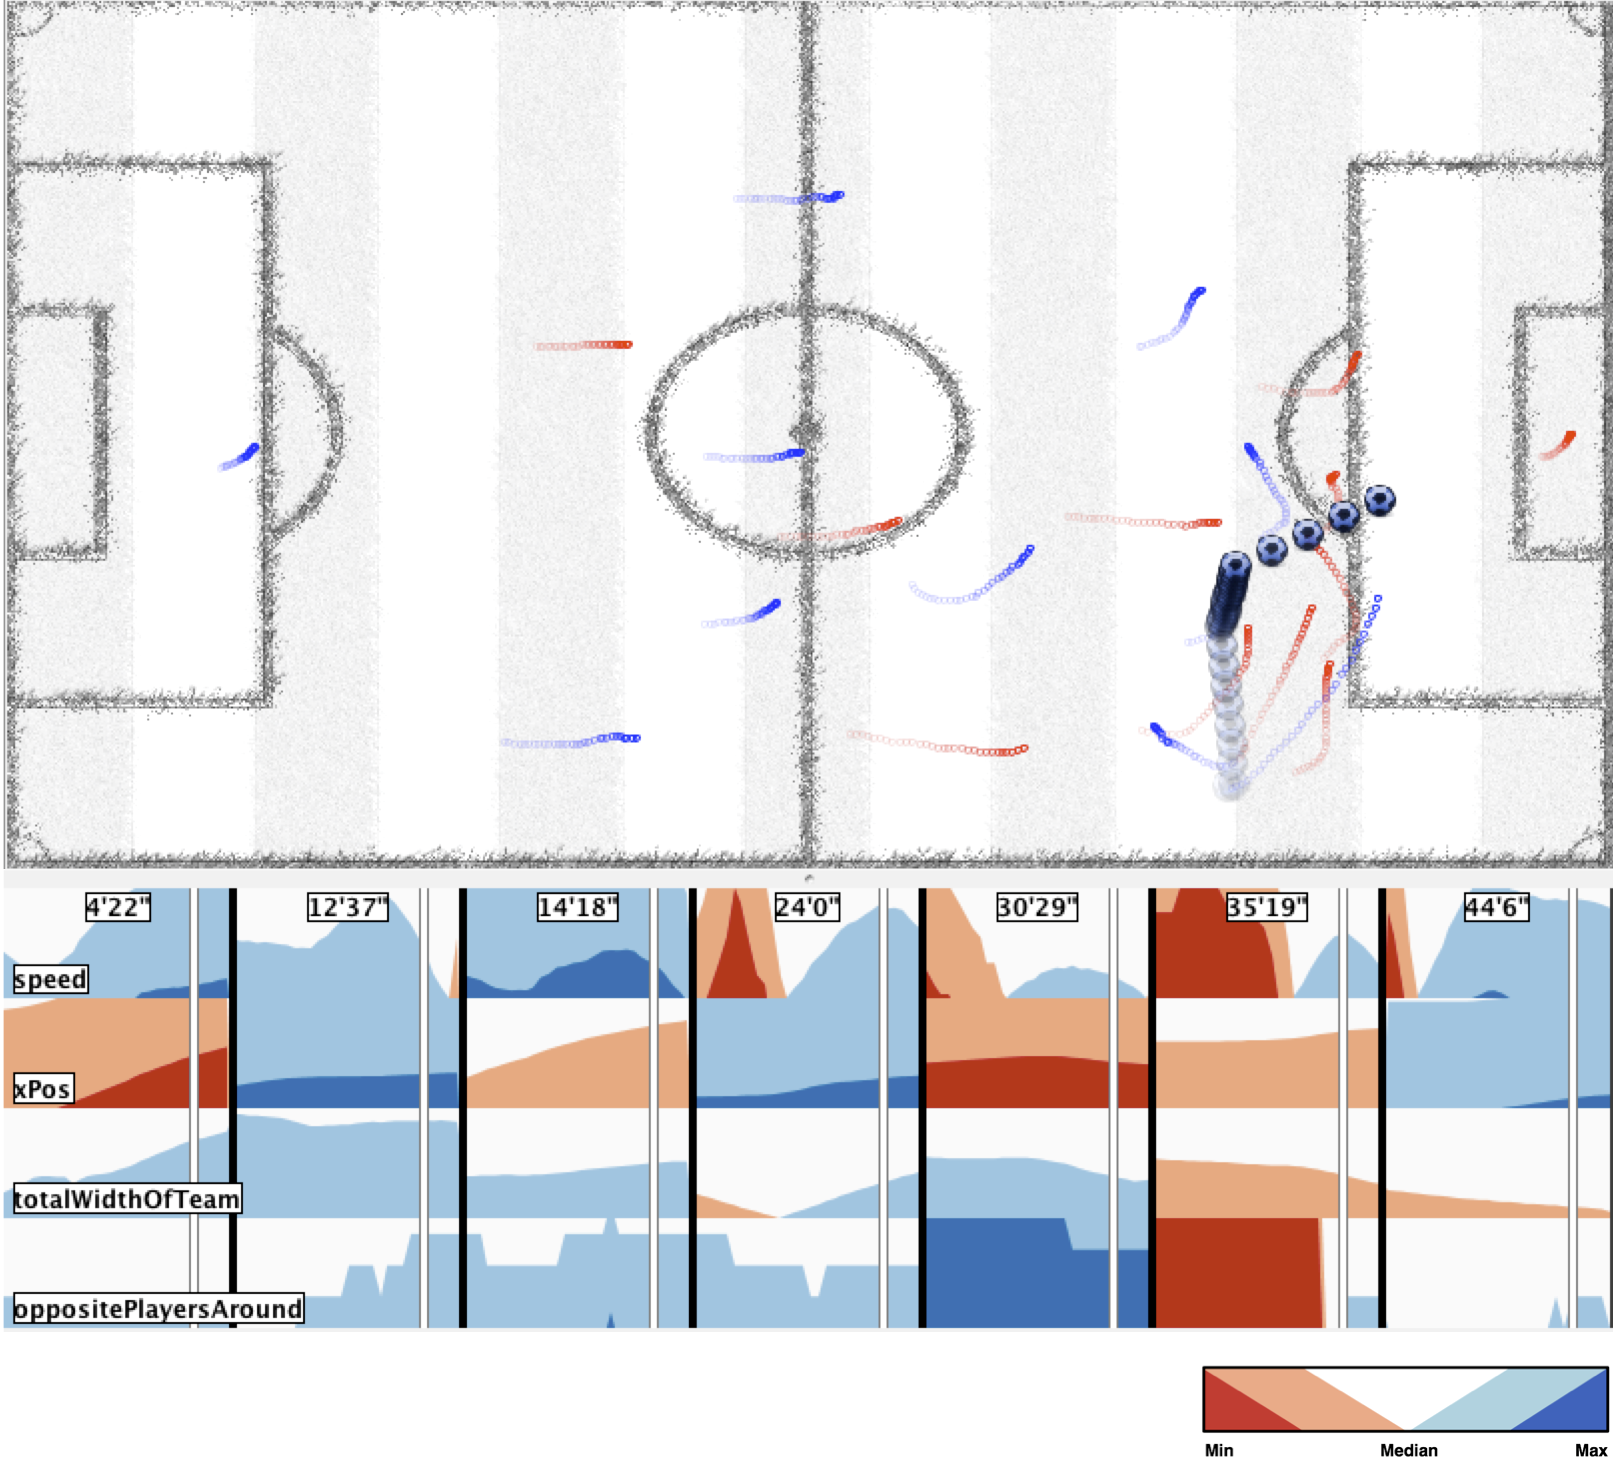 Feature-driven visual analytics of soccer data